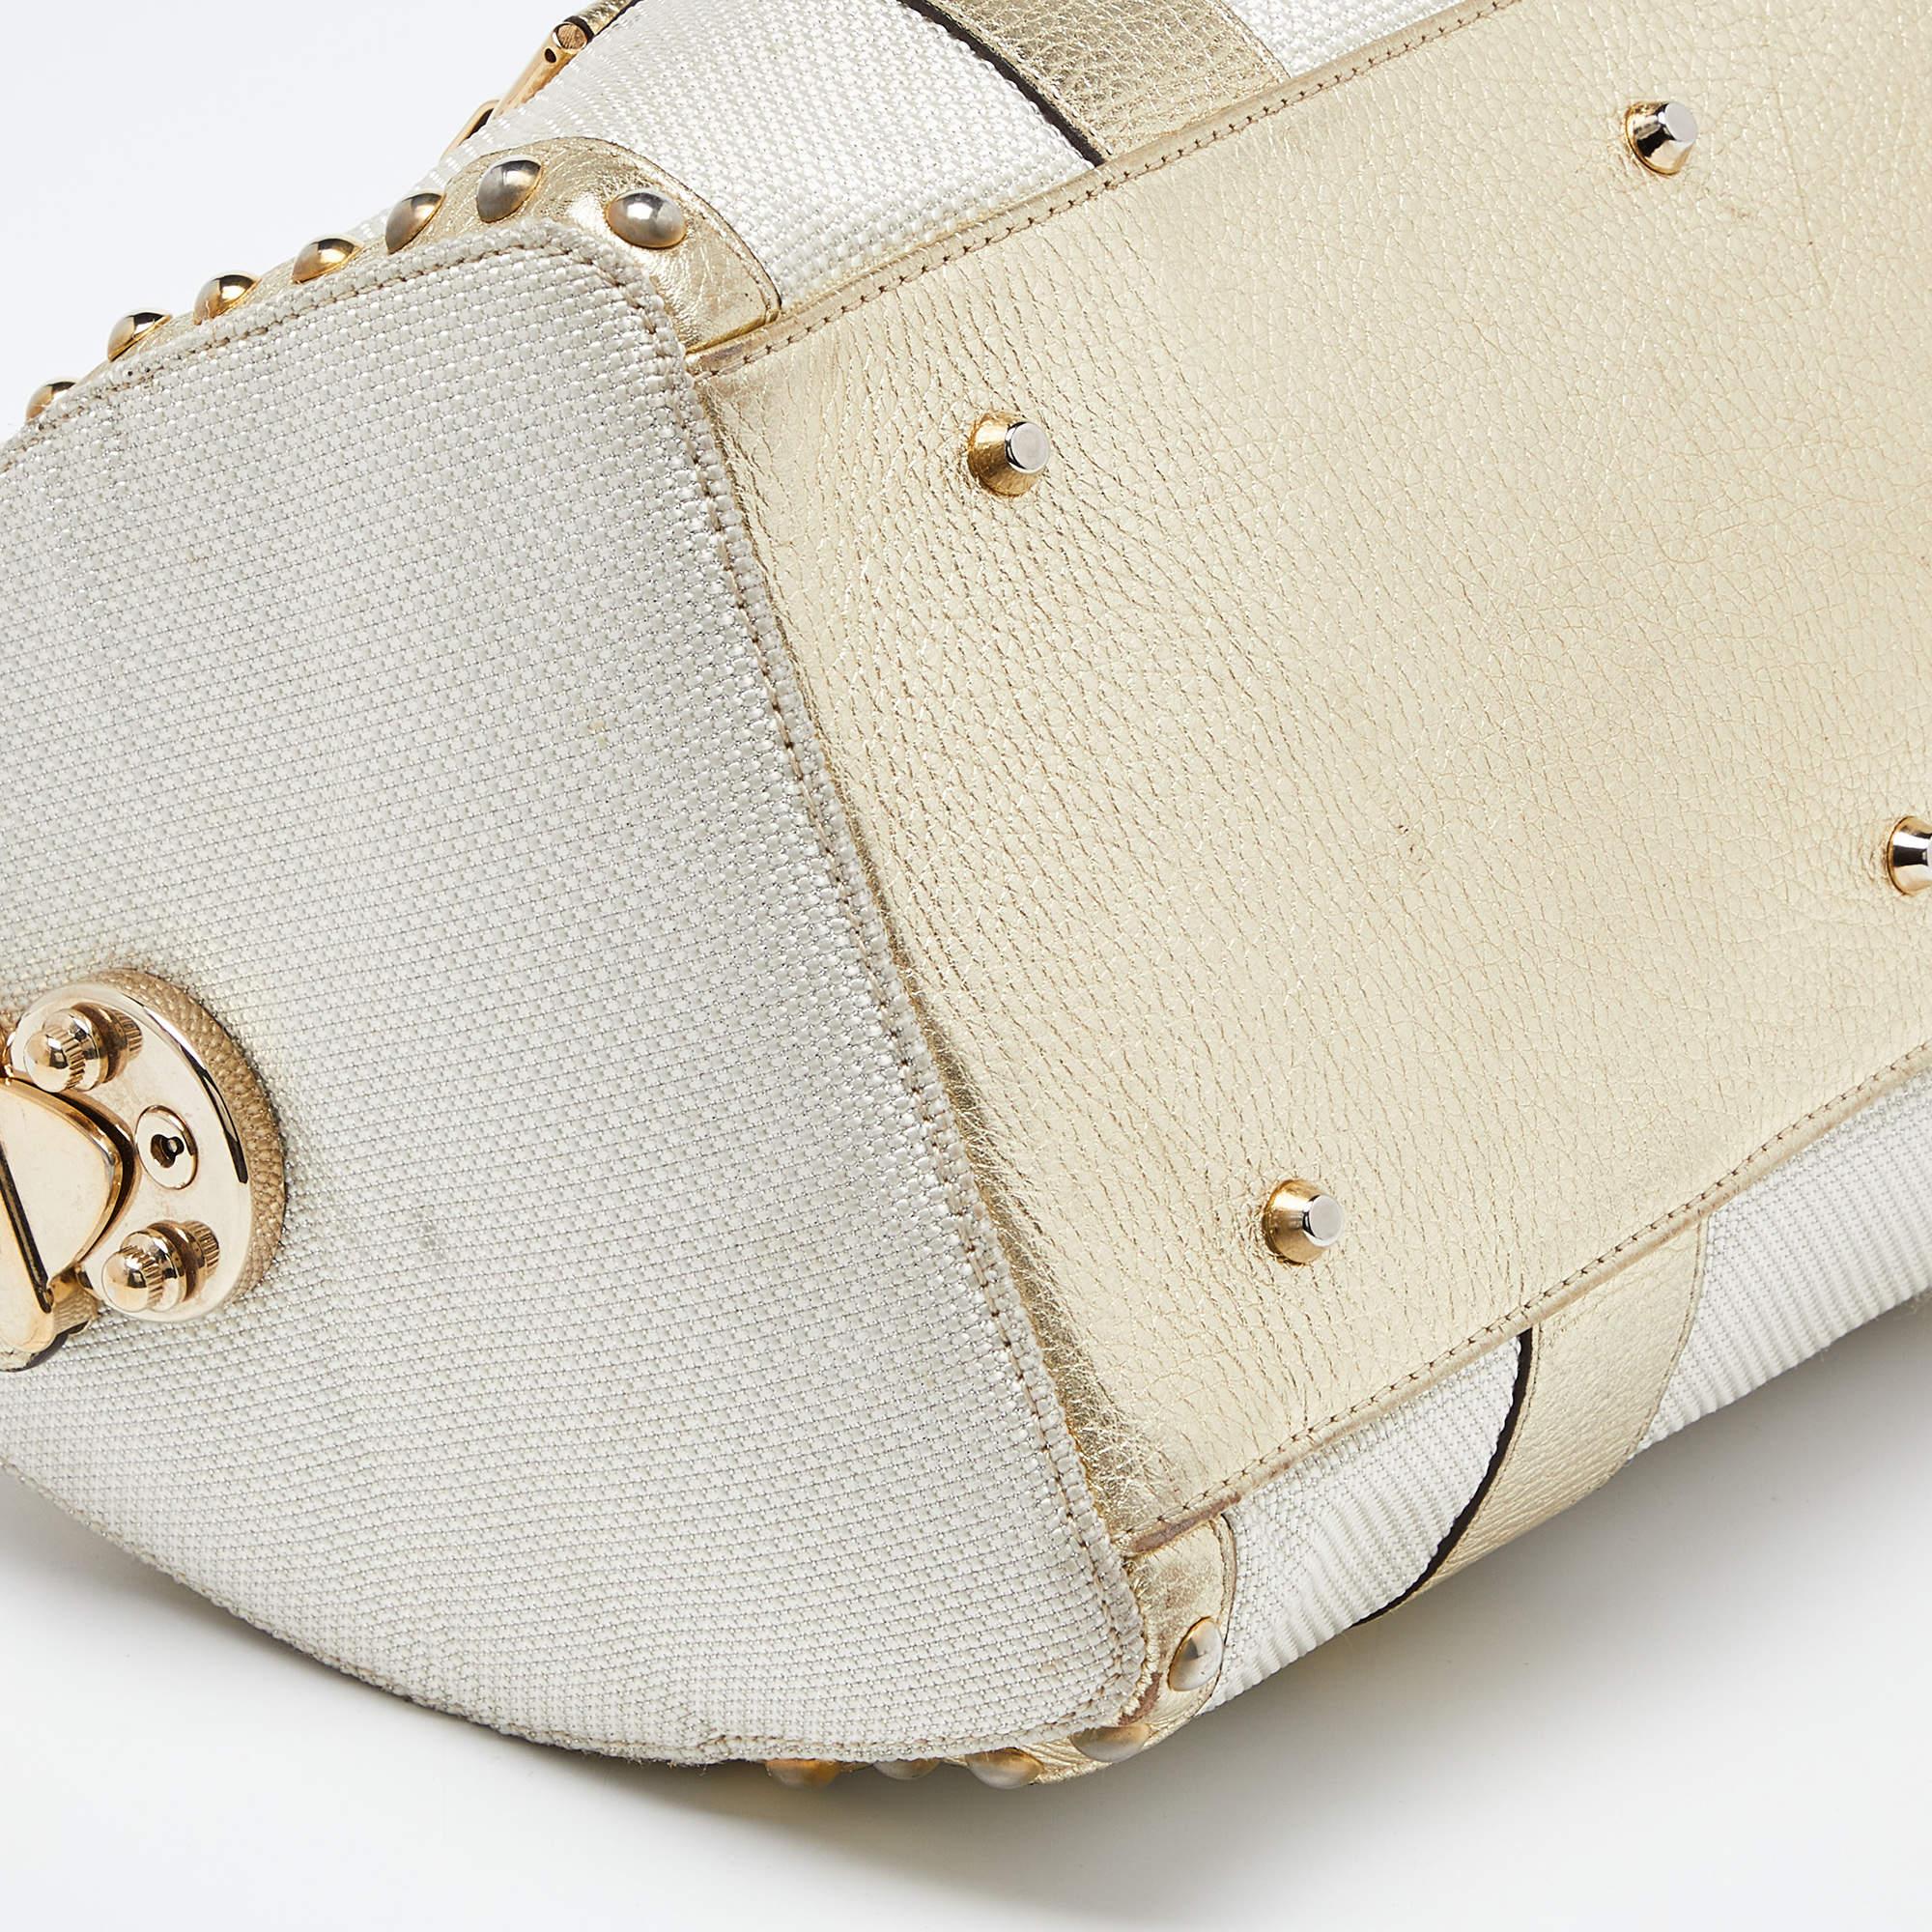 Versace Beige/Gold Nylon and Leather Studded Madonna Satchel For Sale 4